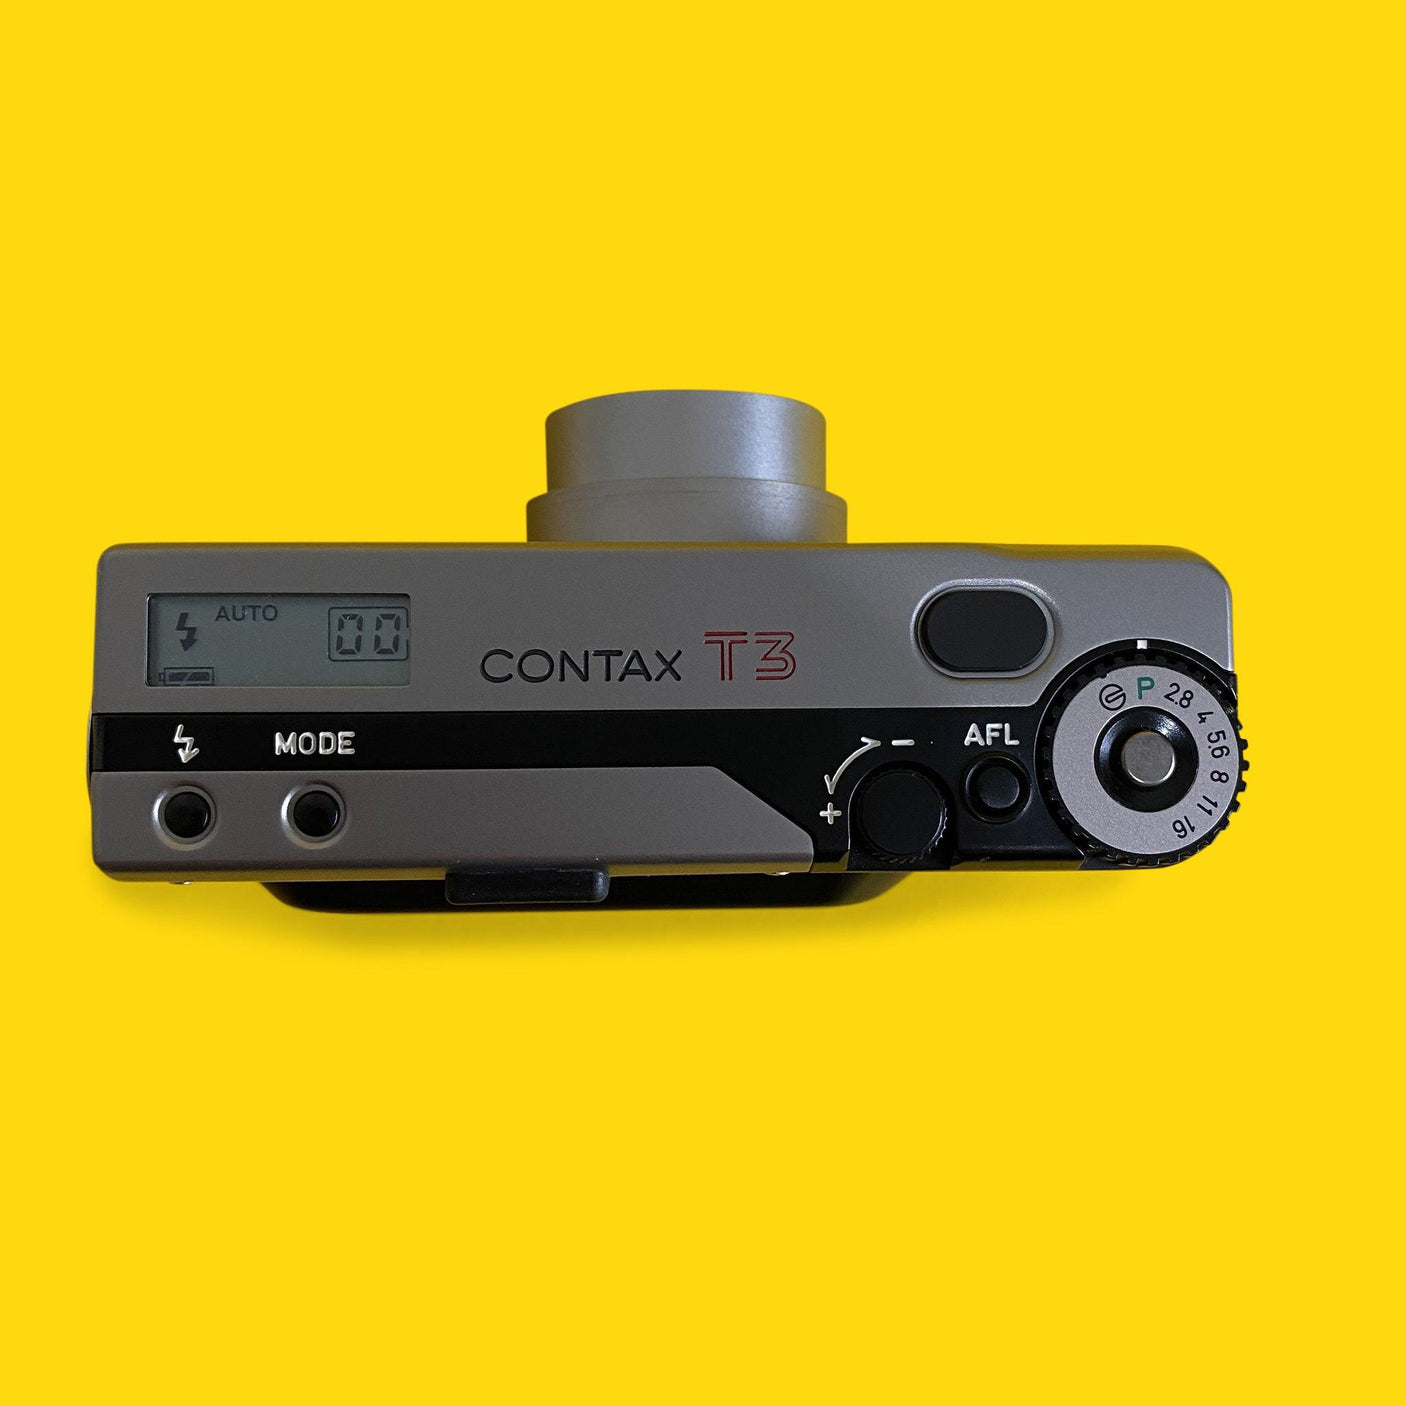 Contax T3 Titan Silver 35mm Film Camera Point & Shoot with 35mm f/2.8 Lens